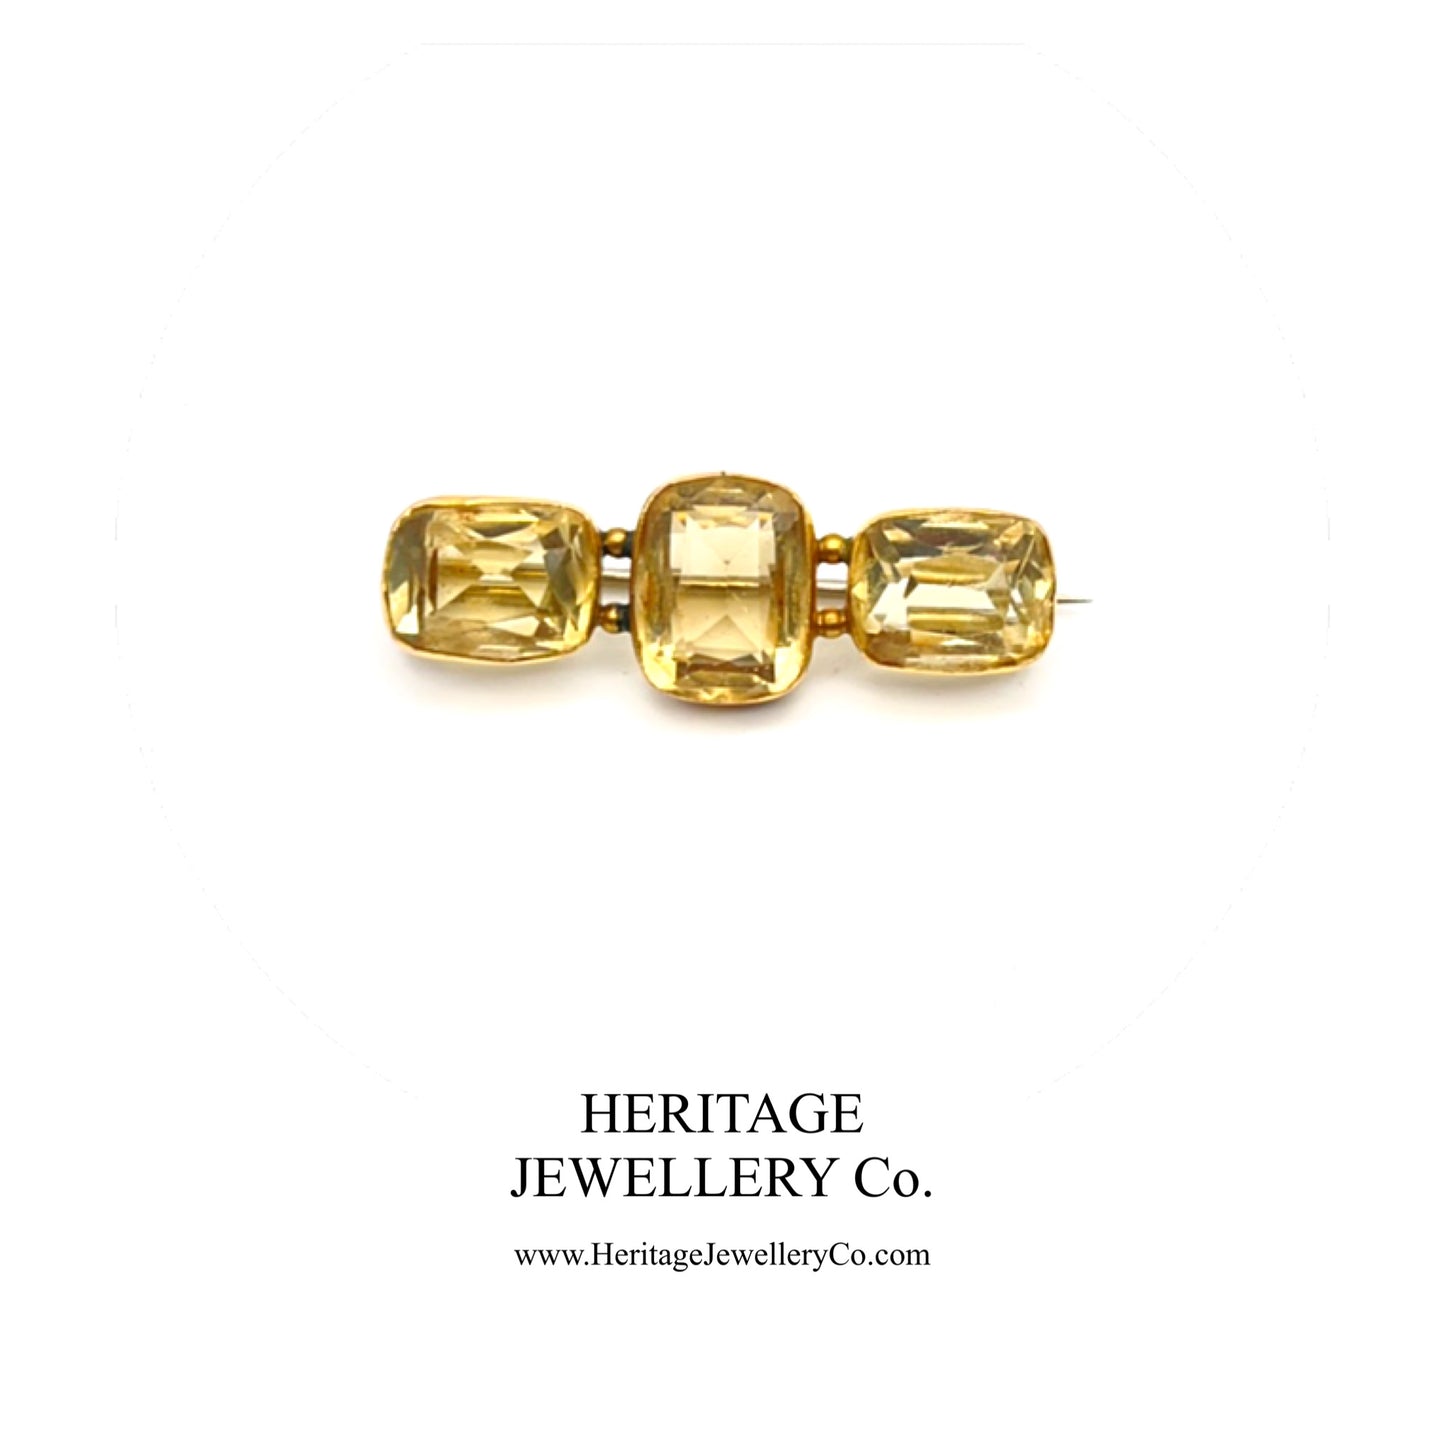 Antique Gold and 3-stone Citrine Brooch